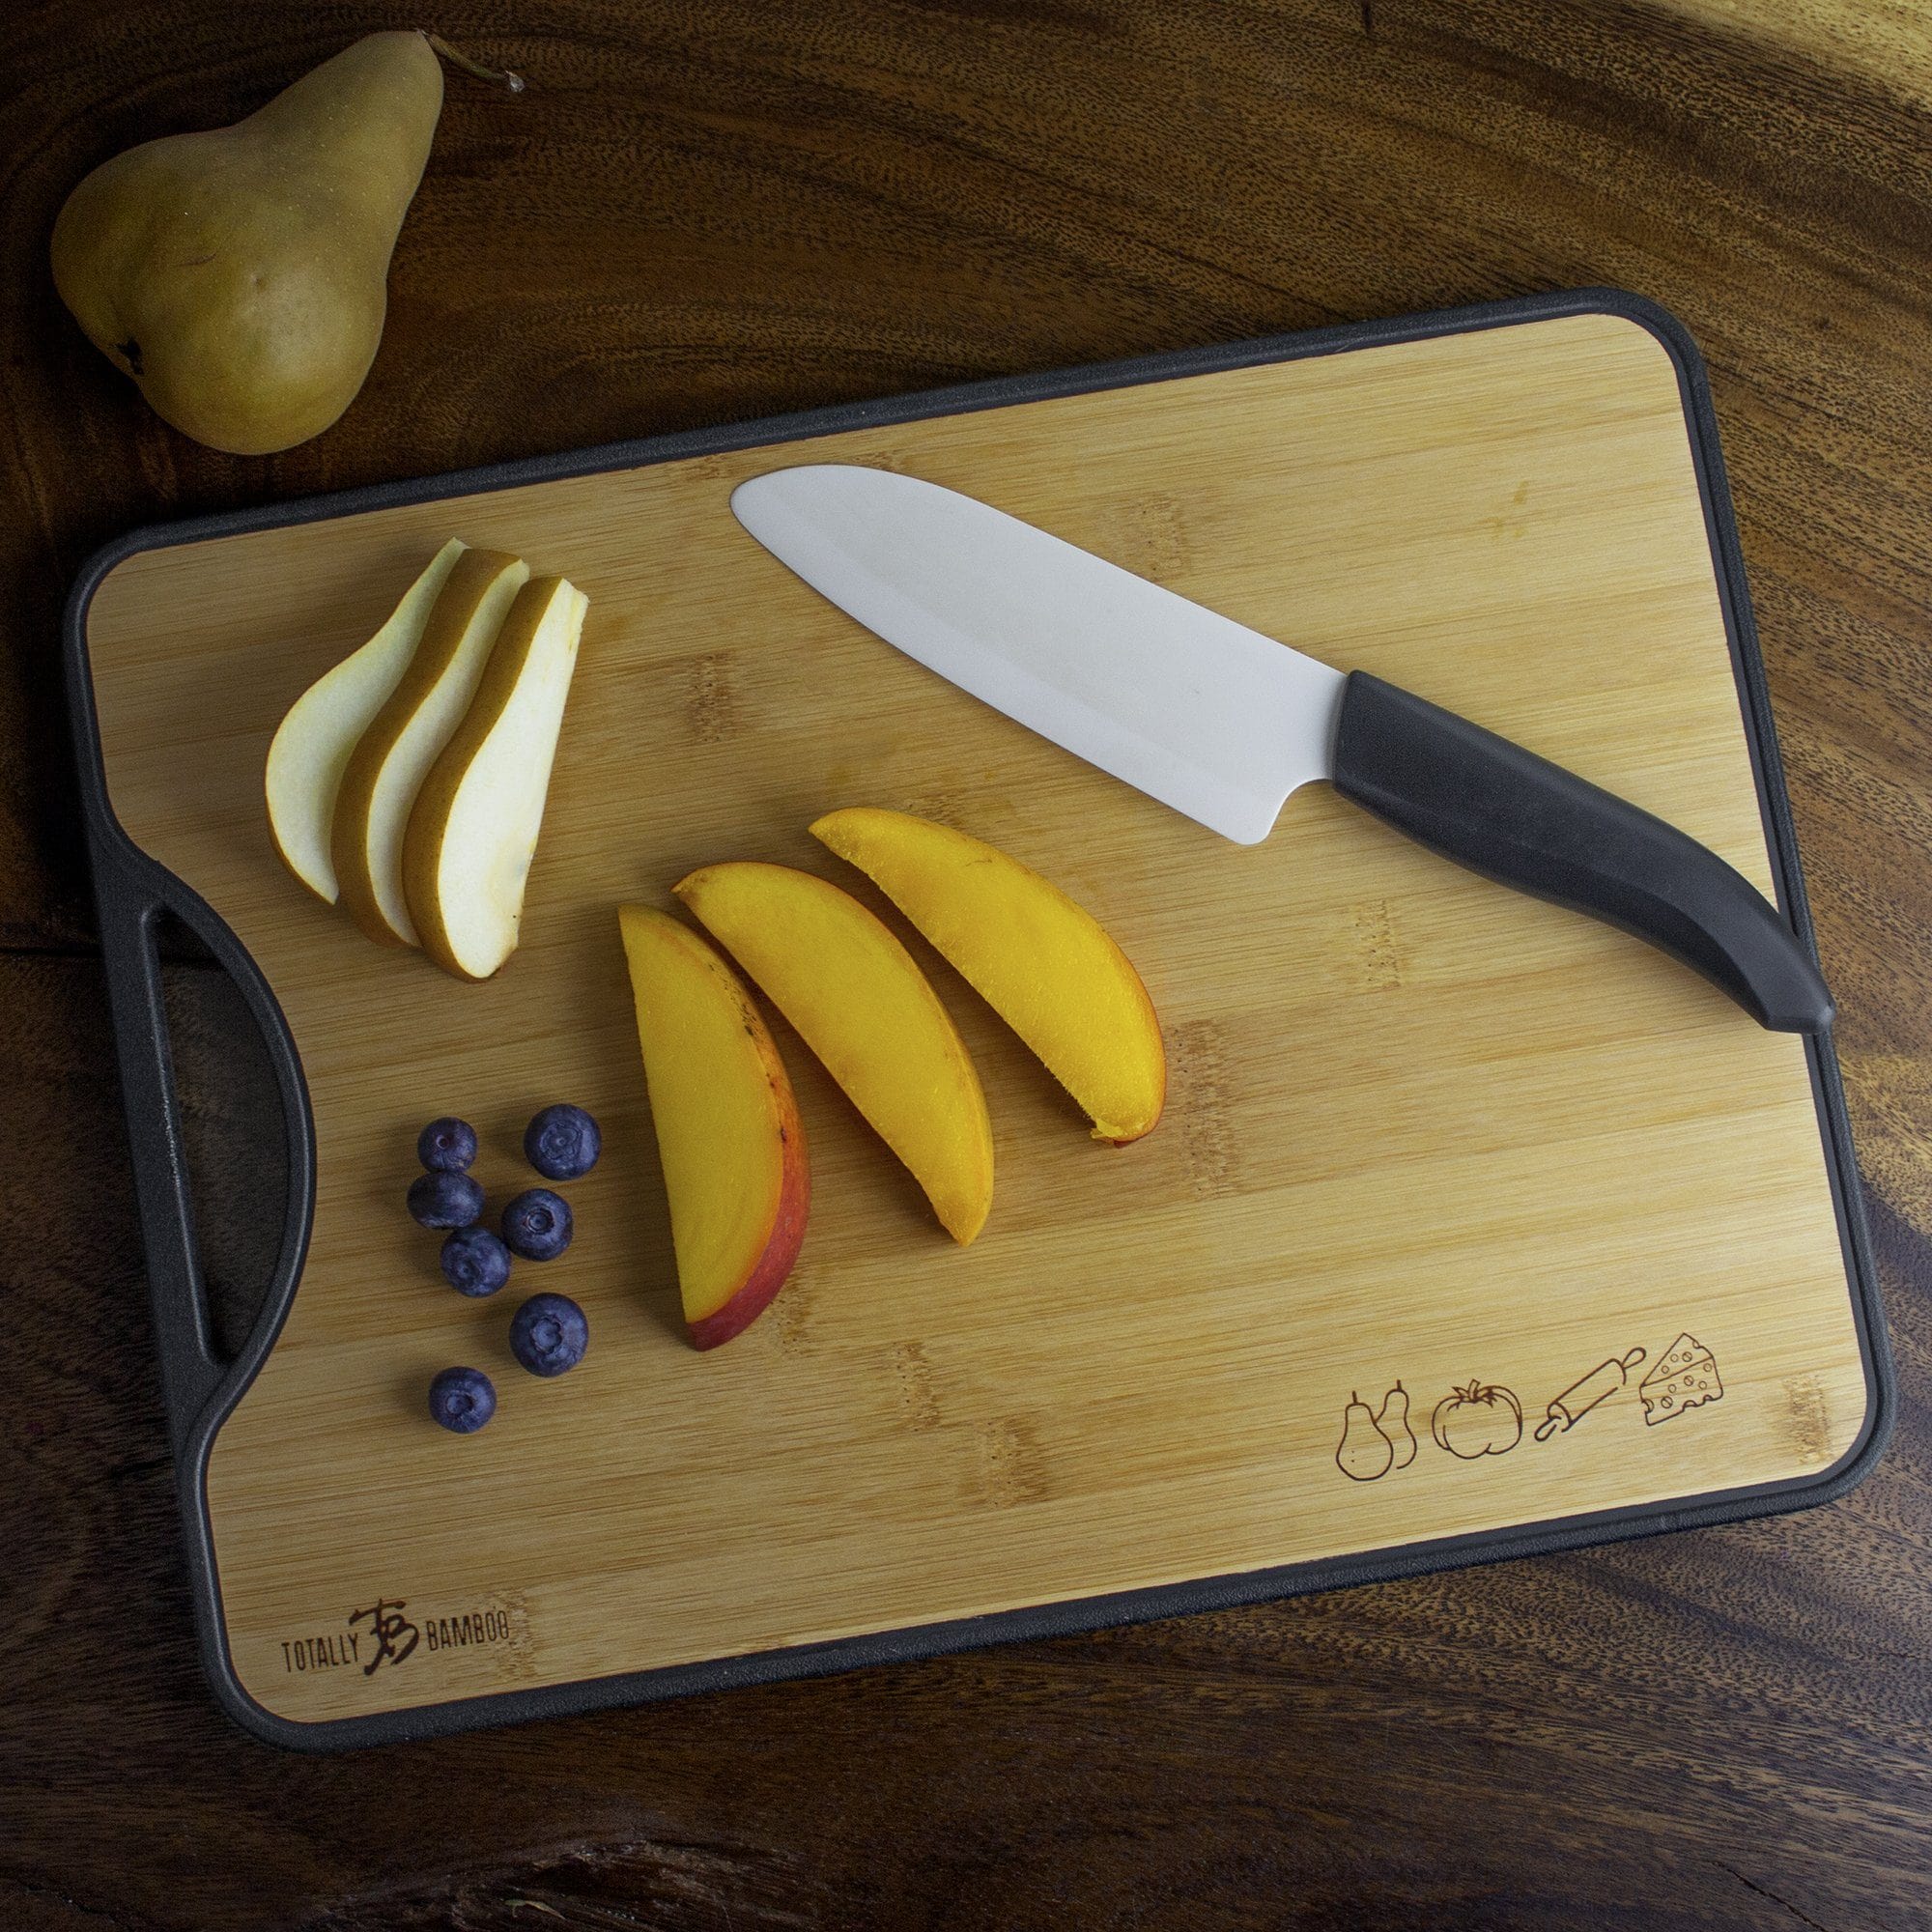 Bamboo Cutting Board for Kitchen, Wood Chopping Board, Easy Grip